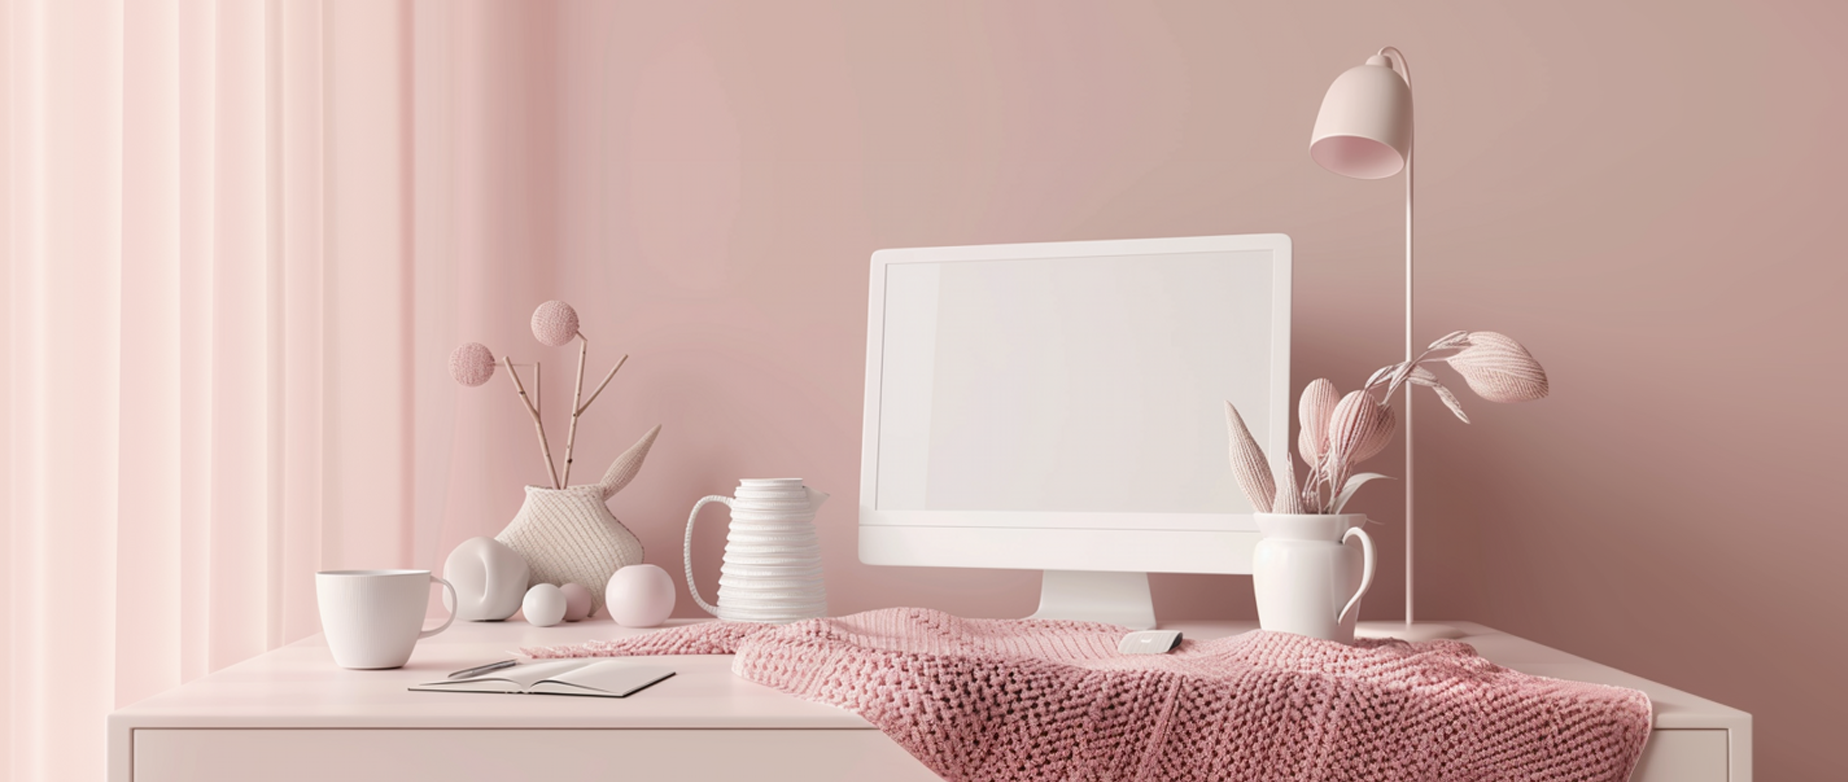 A home office desk set up with pink walls and decor.